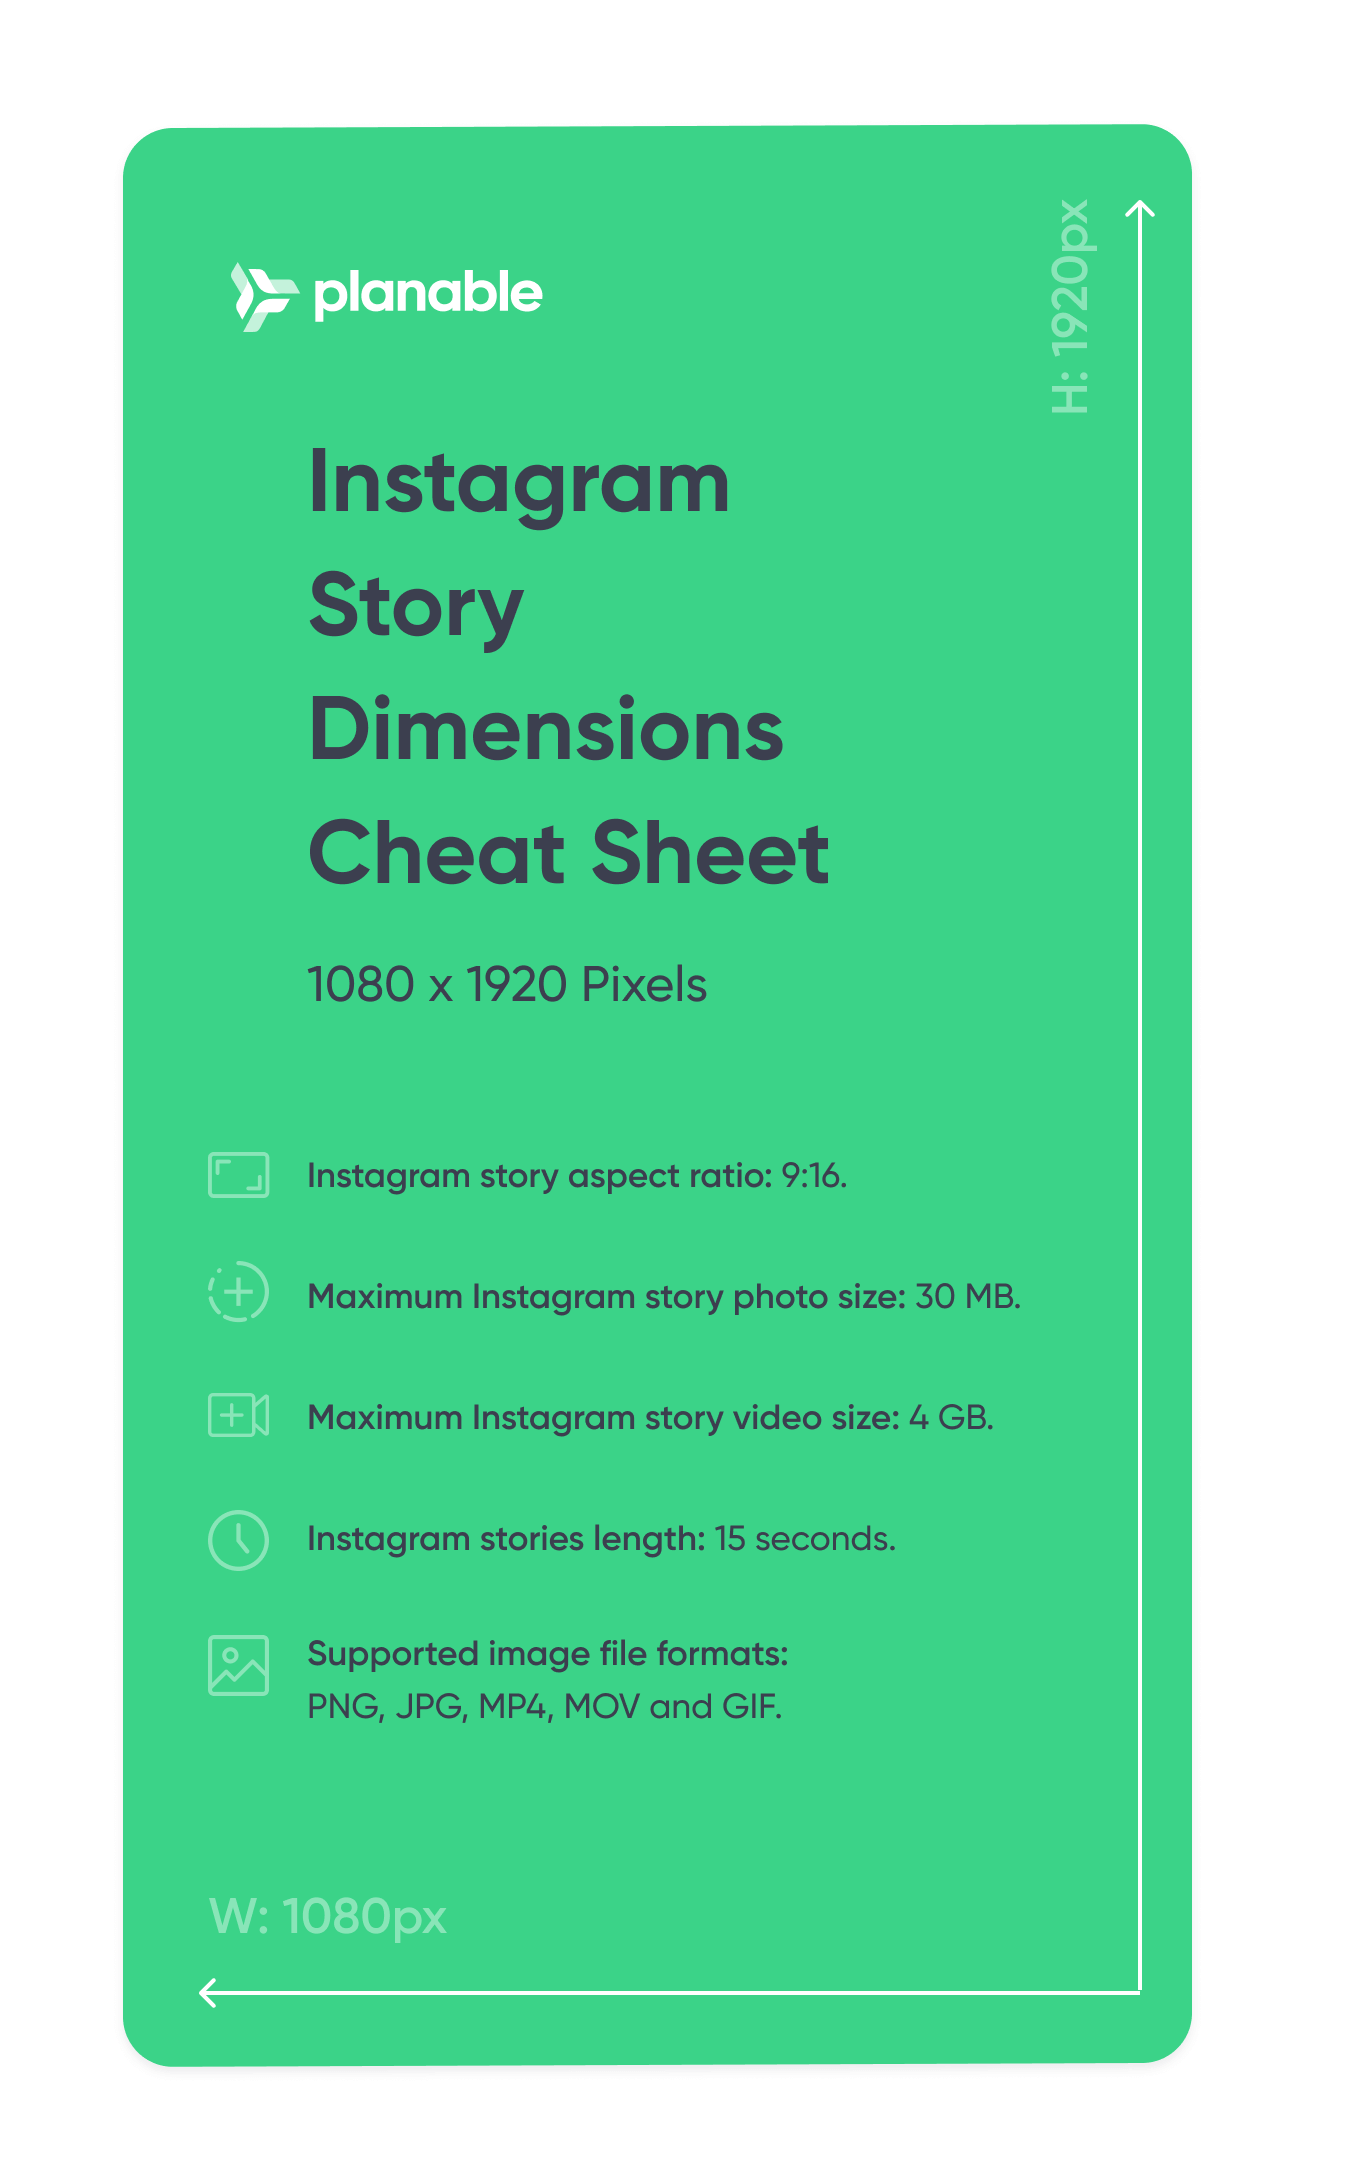 instagram story dimensions are 1080 x 1920 pixels